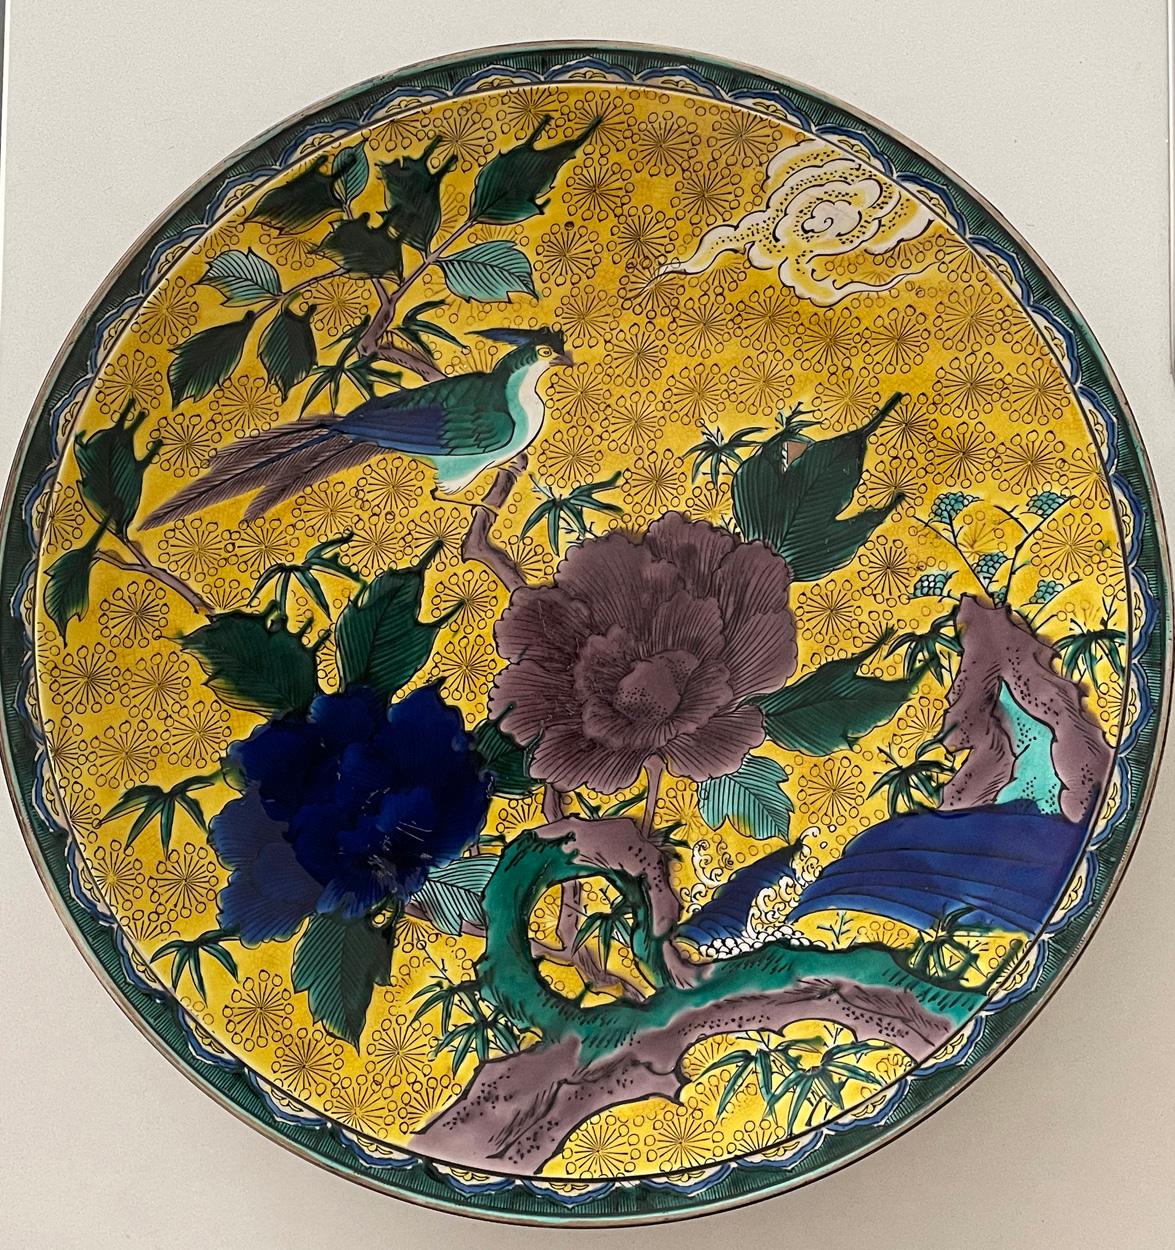 A rare yellow ground Japanese ceramic charger 15.5 inches in diameter.

Decorated on a yellow base with a bird, foliage and blossom in shades of yellow, blue, brown and green.

Signed to the base with the studio stamp.

In very good condition